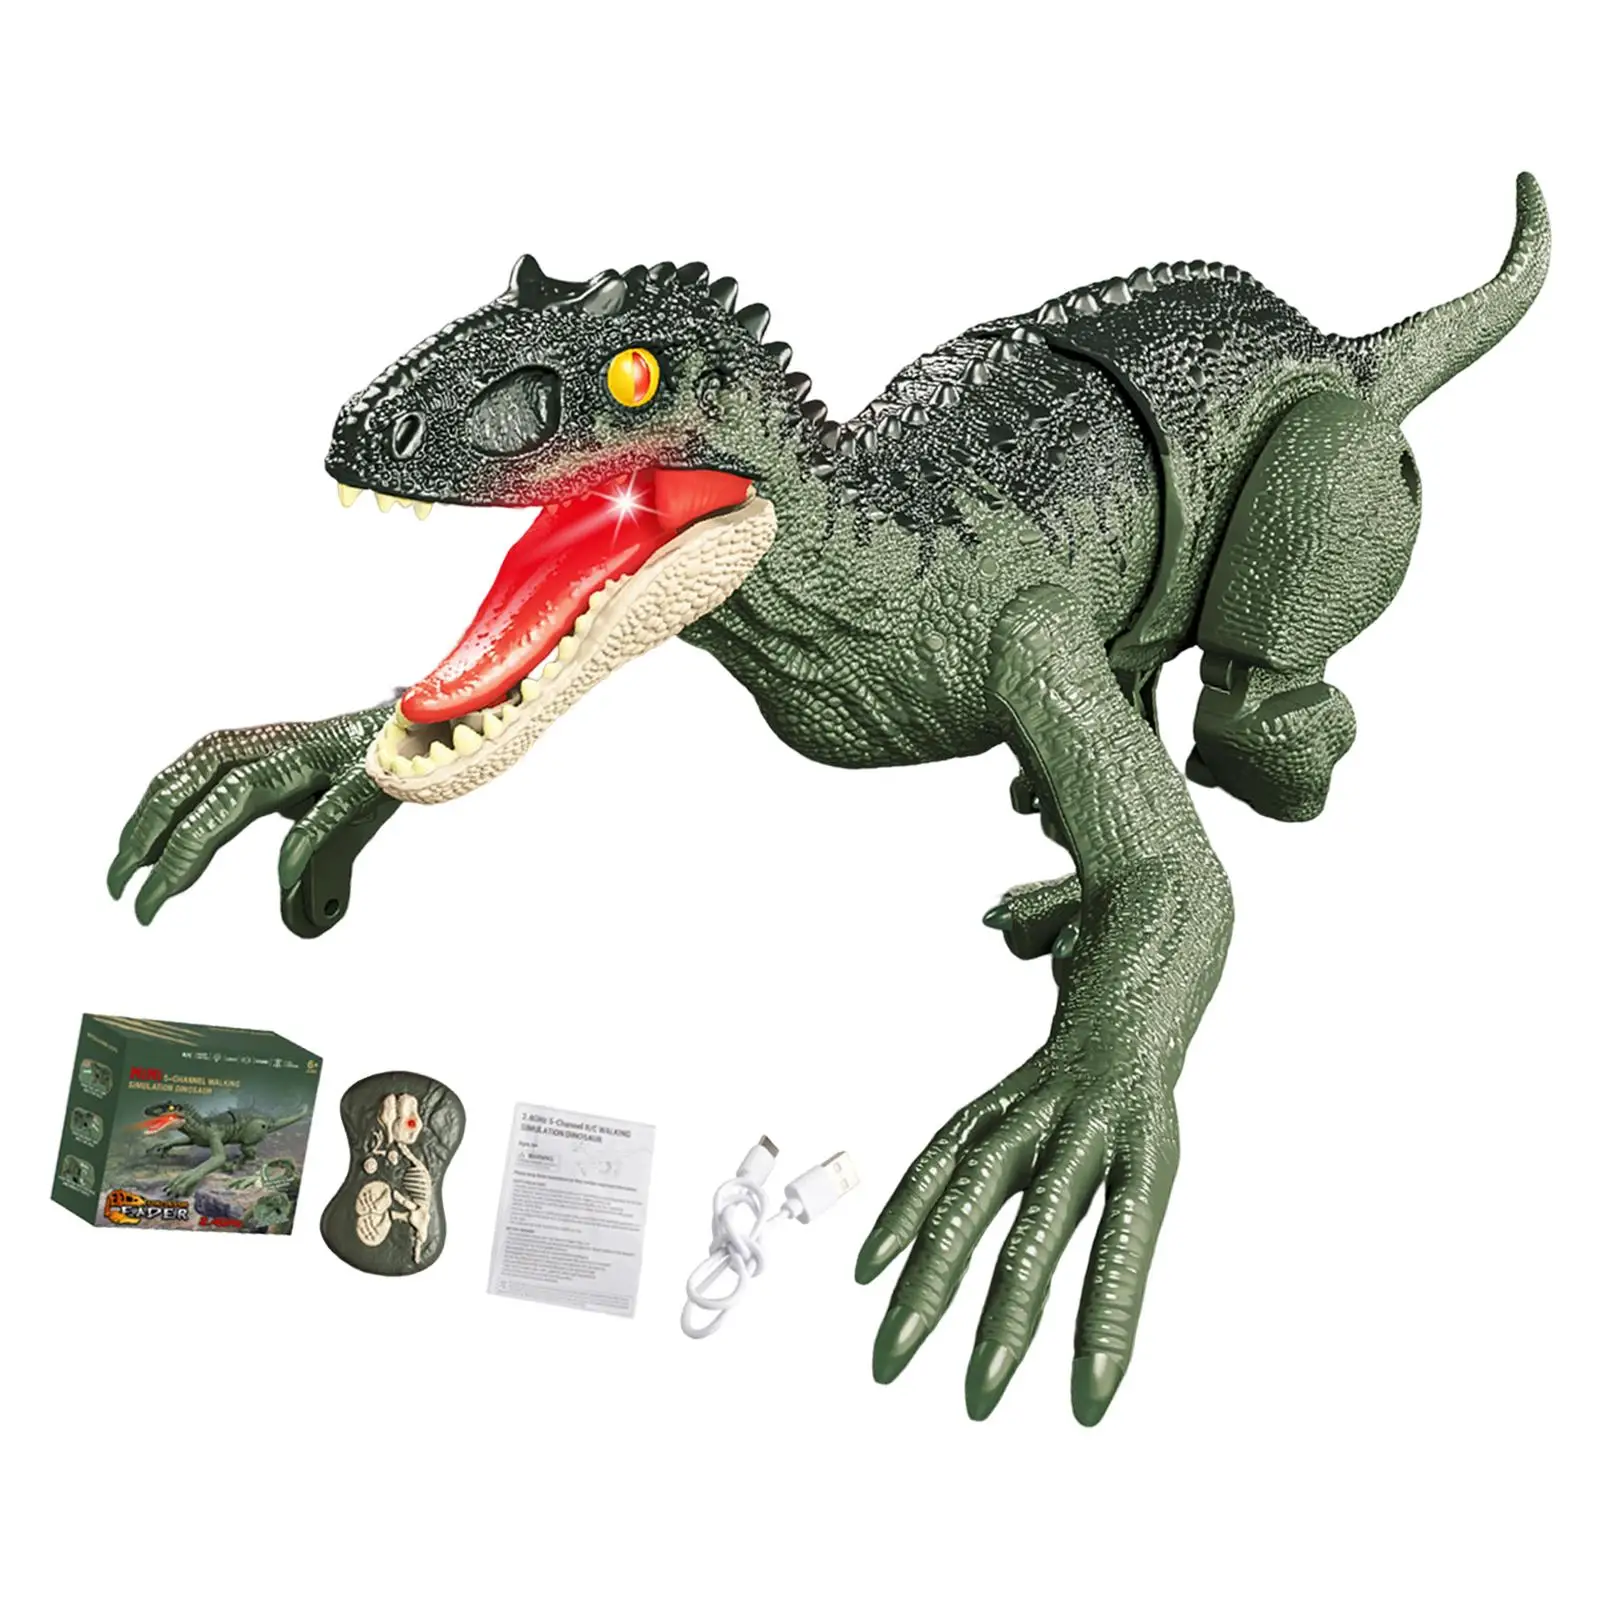 RC Dinosaur Toy Walking Dinosaur Toys Remote Control Dinosaur Toys Children Dinosaur Toys for Kids Toddlers Boys Holiday Gifts